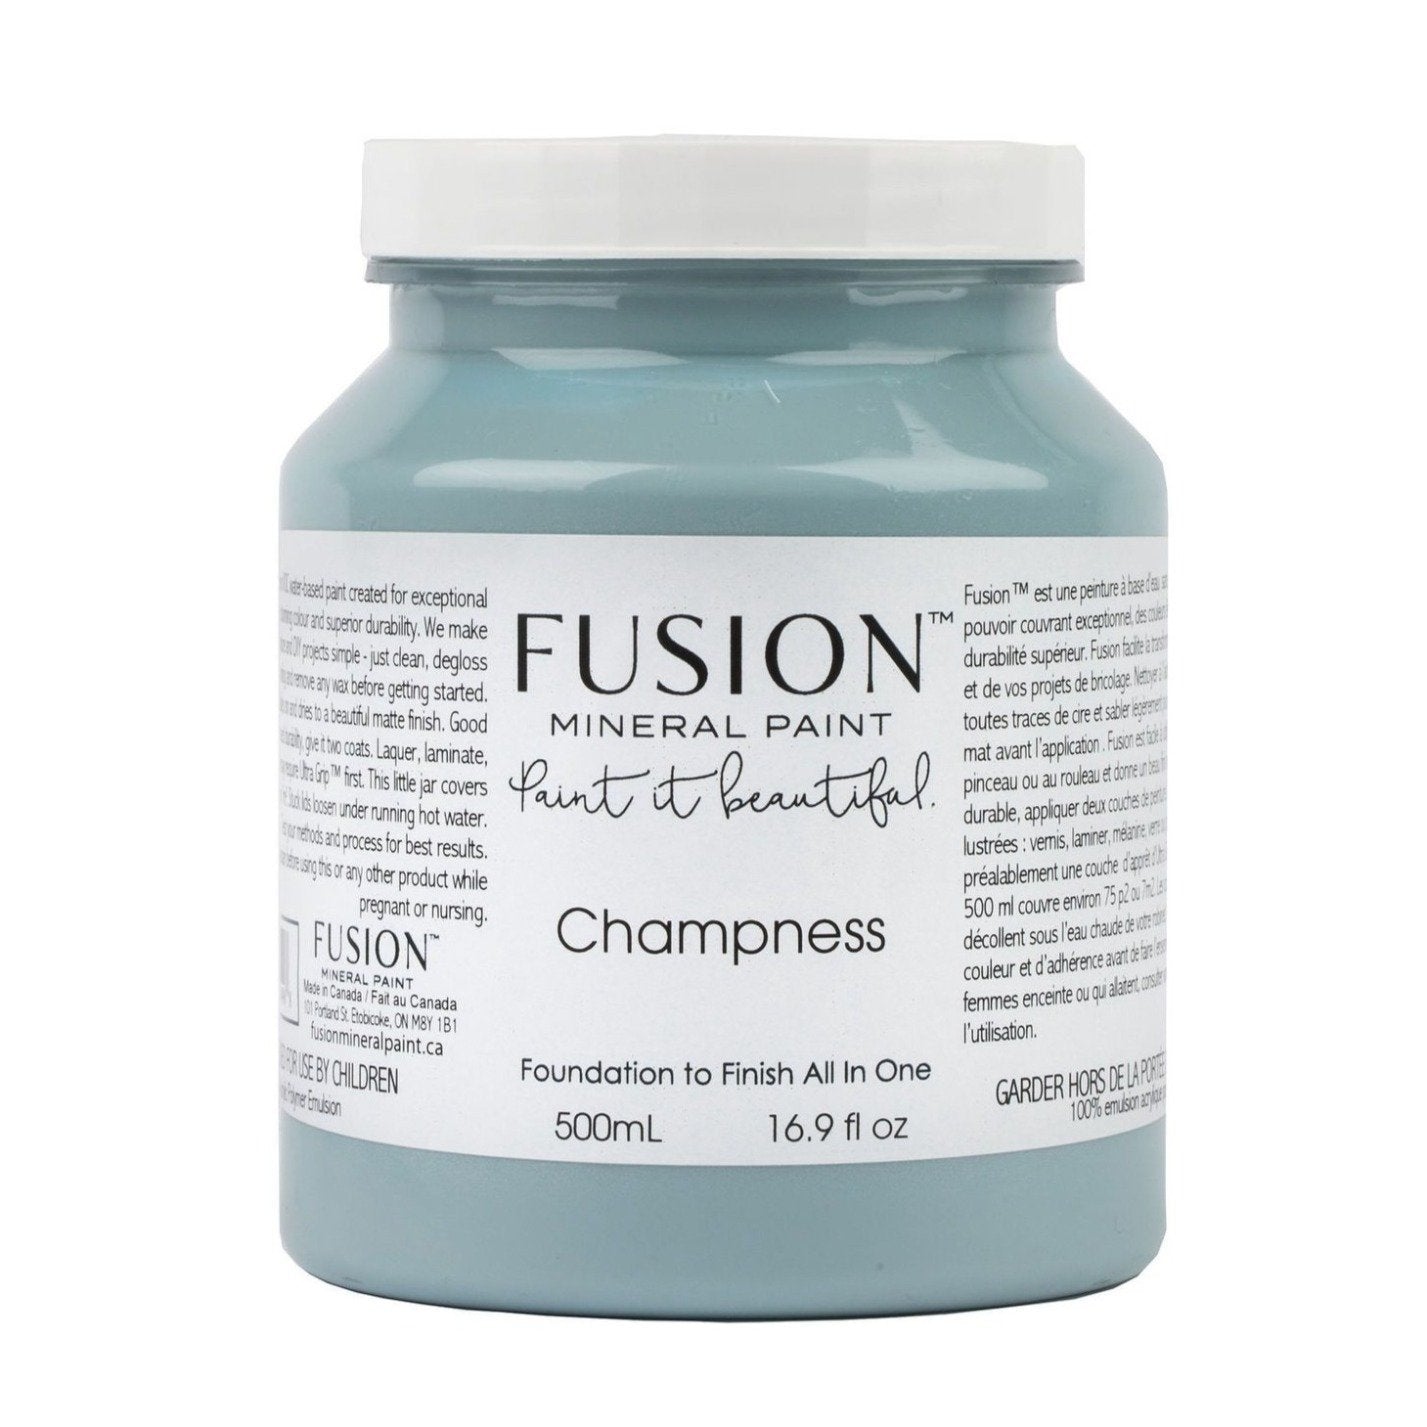 CHAMPNESS - Fusion Mineral Paint - 37ml, 500ml